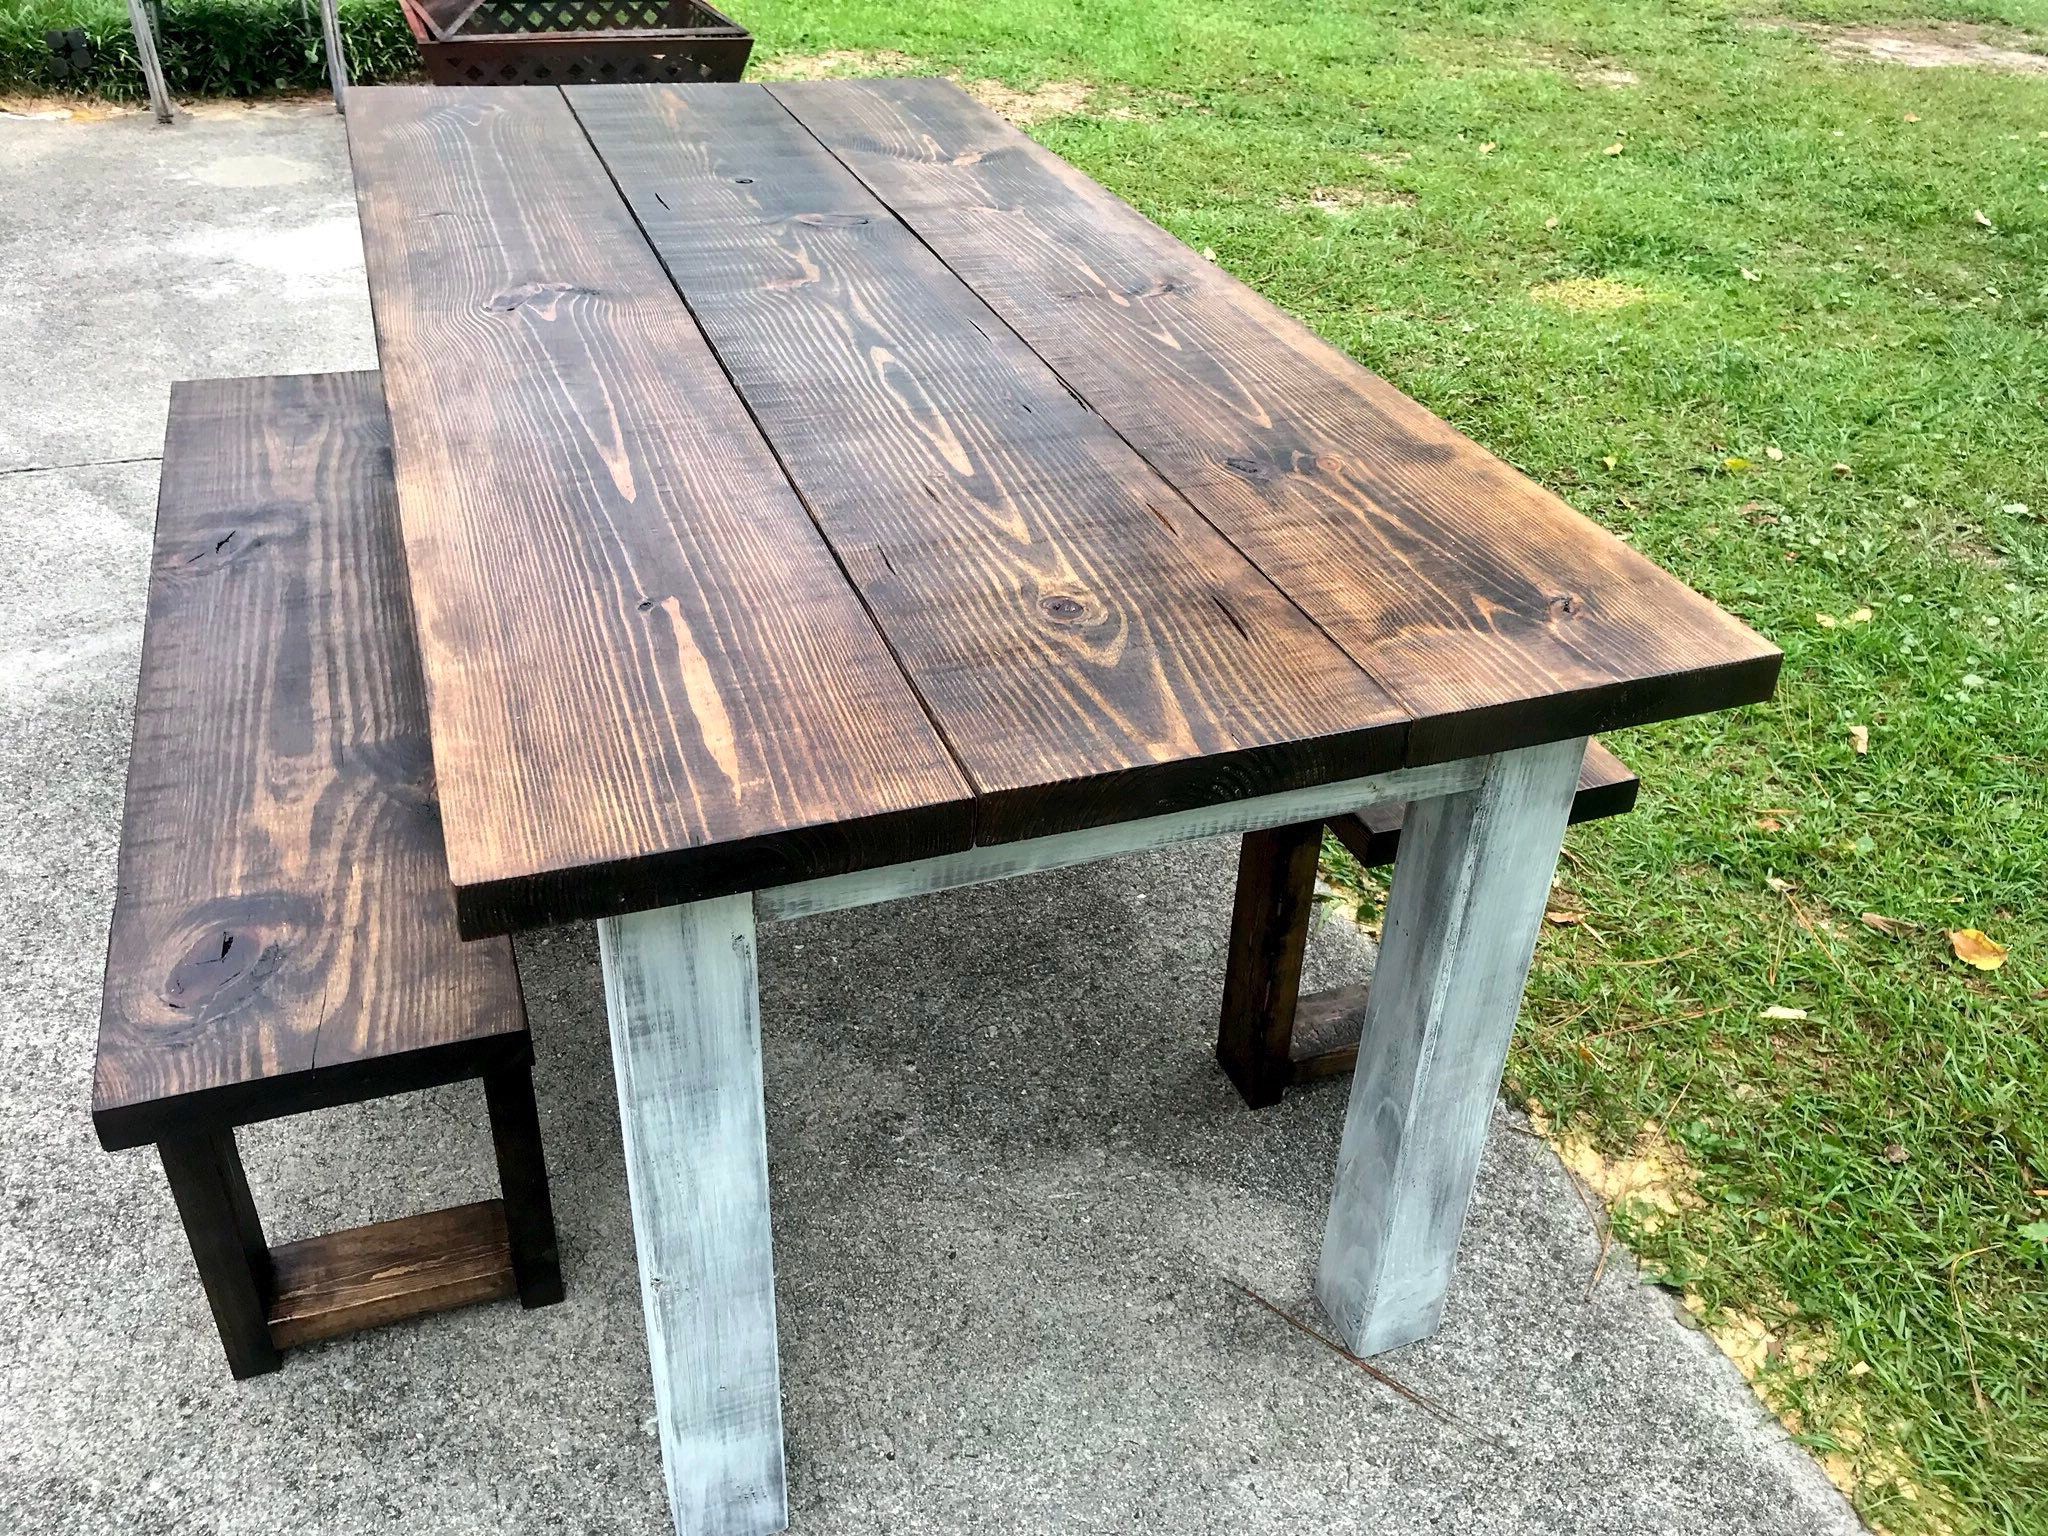 Dark Walnut Farmhouse Table With Benches Rustic Wooden Intended For Most Up To Date Dark Walnut Drink Tables (View 4 of 20)